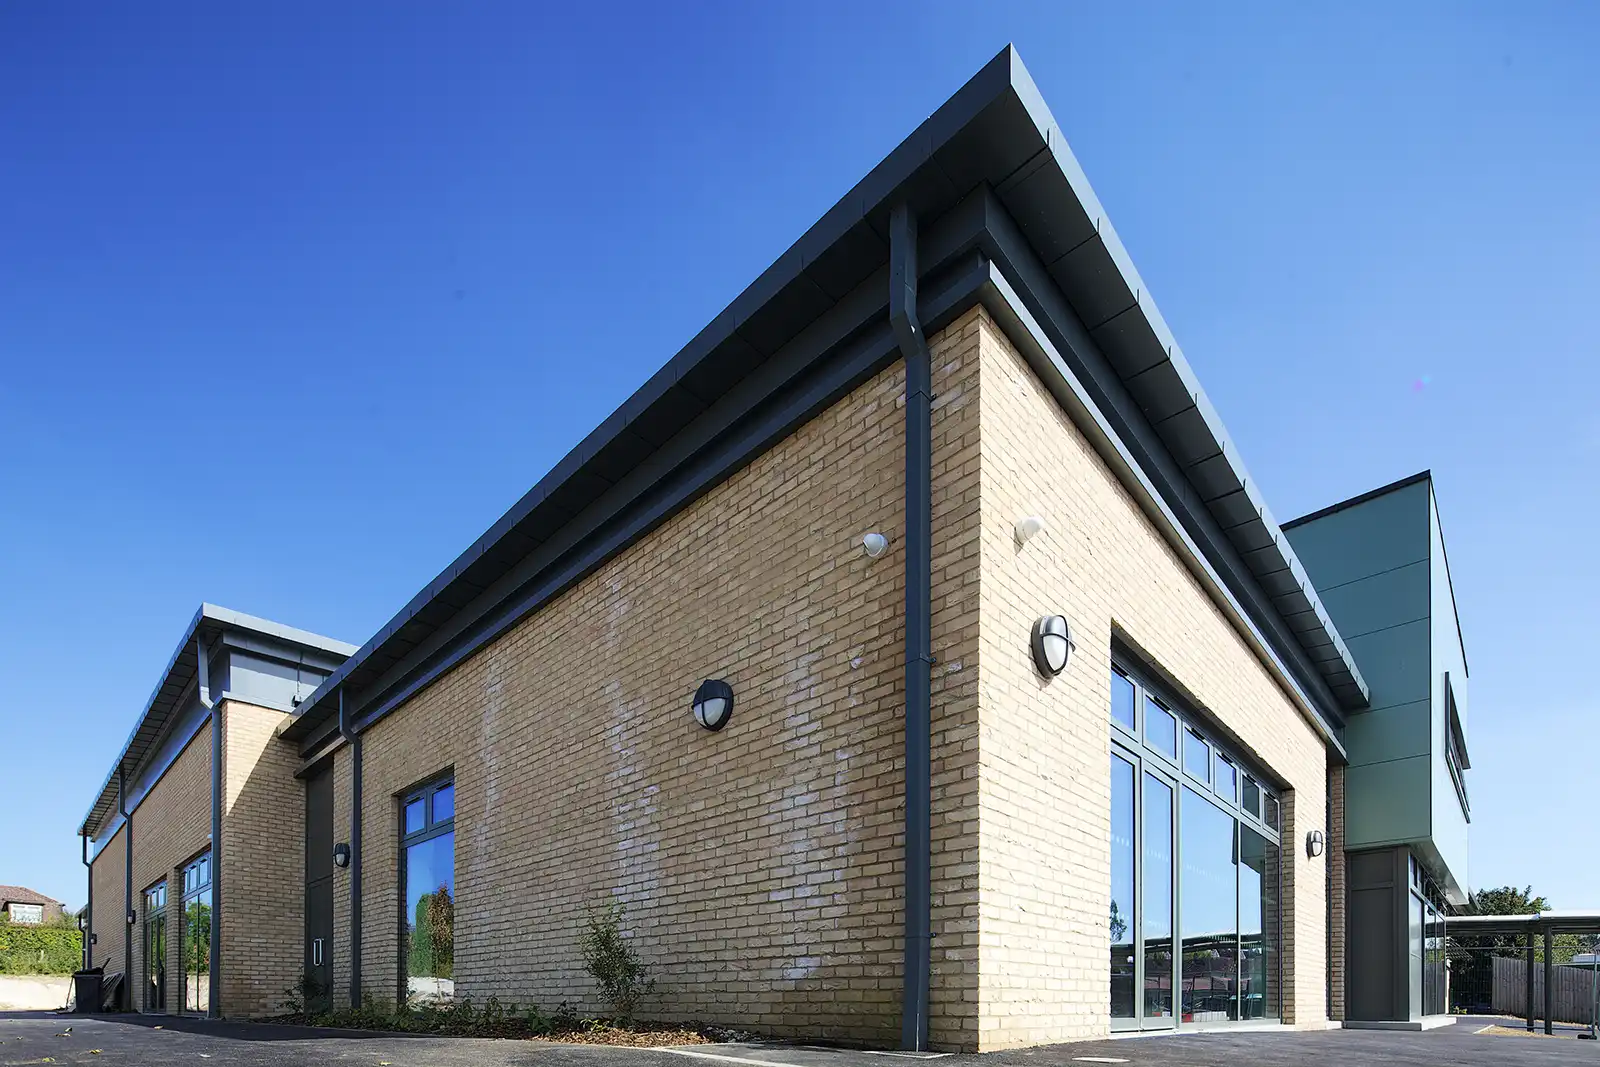 The block replaces an ageing building at Stonehenge School, Amesbury